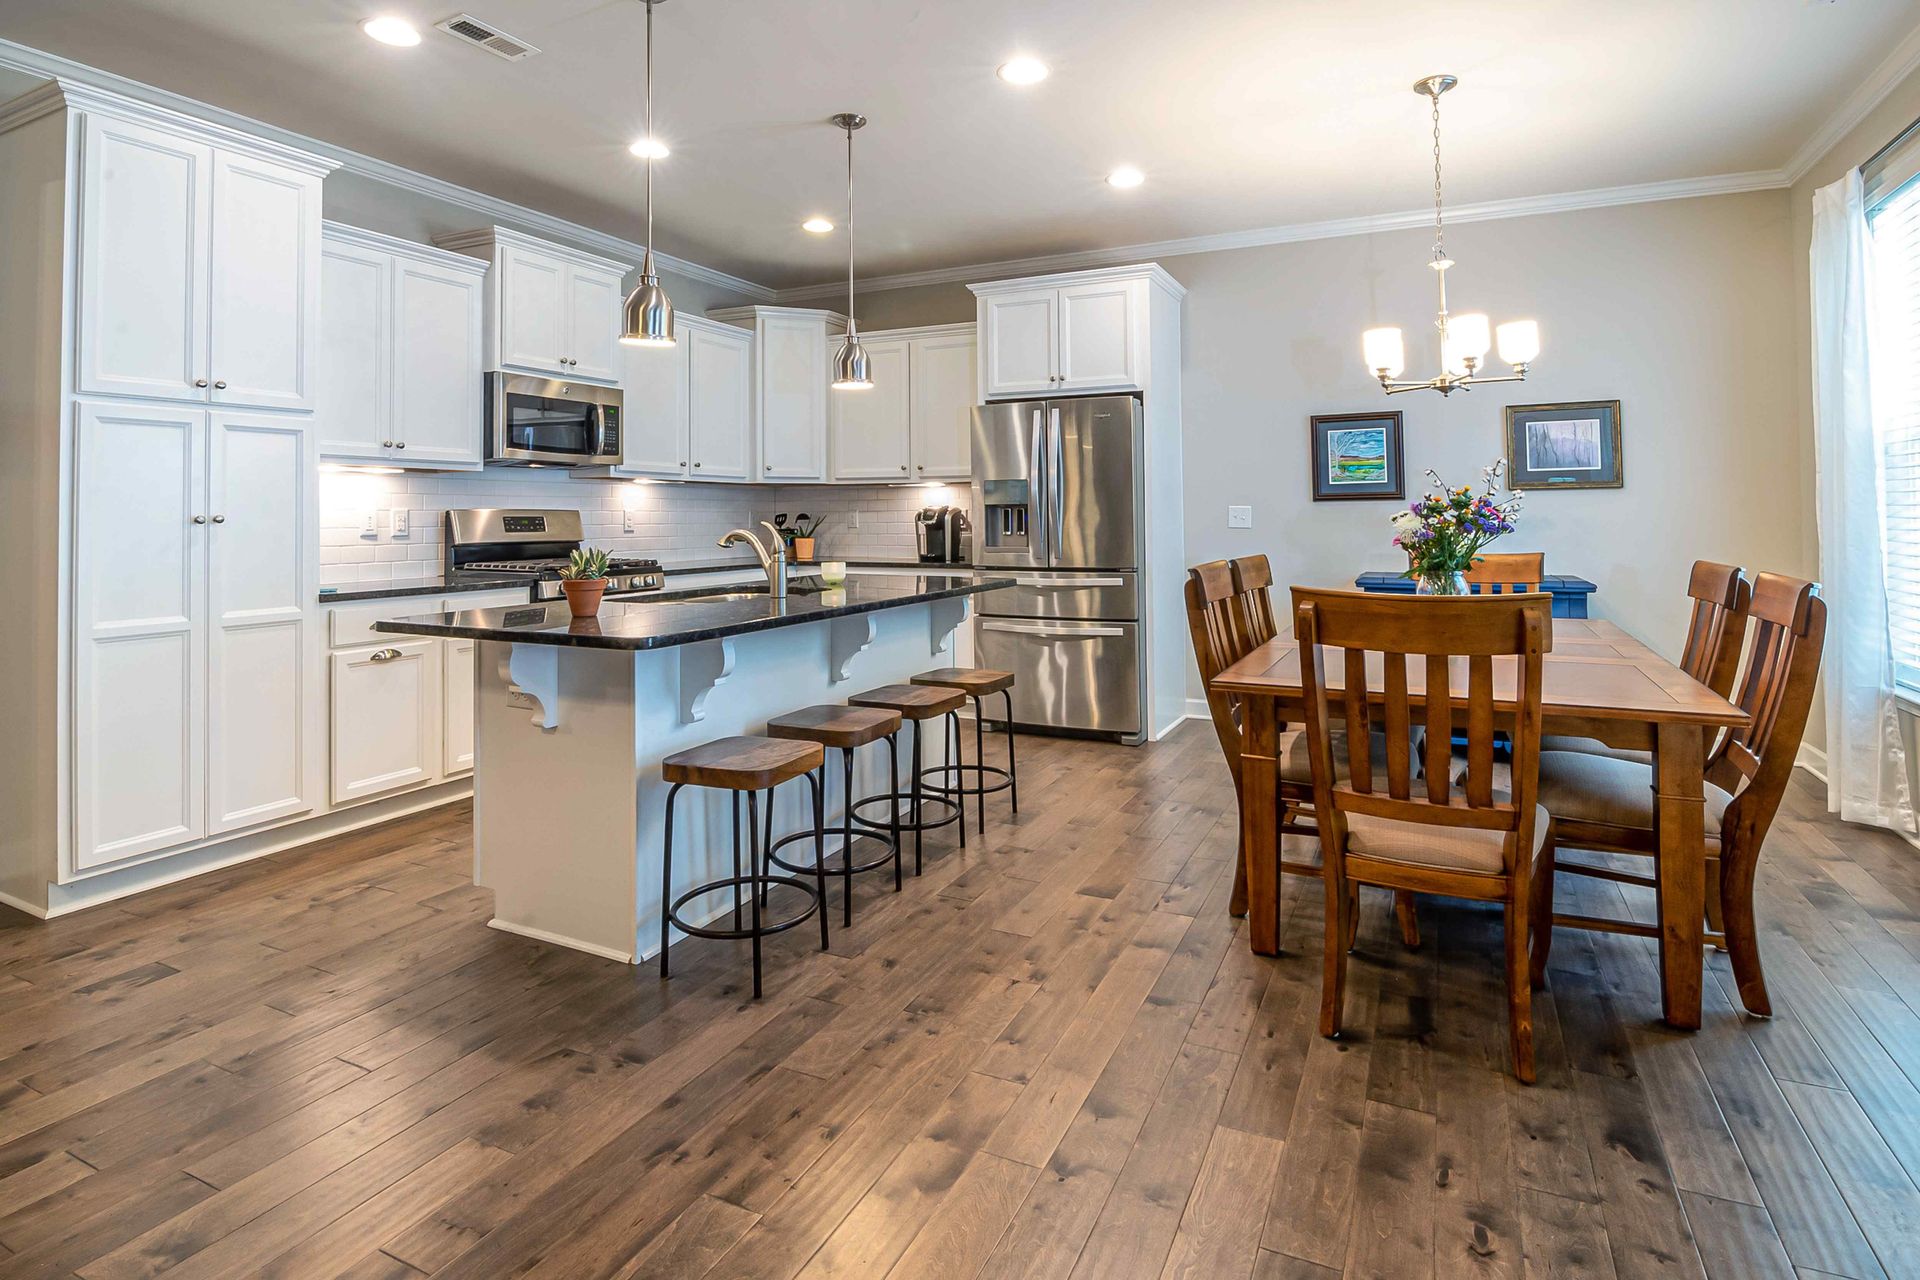 Large kitchen with white cabinets and barstools